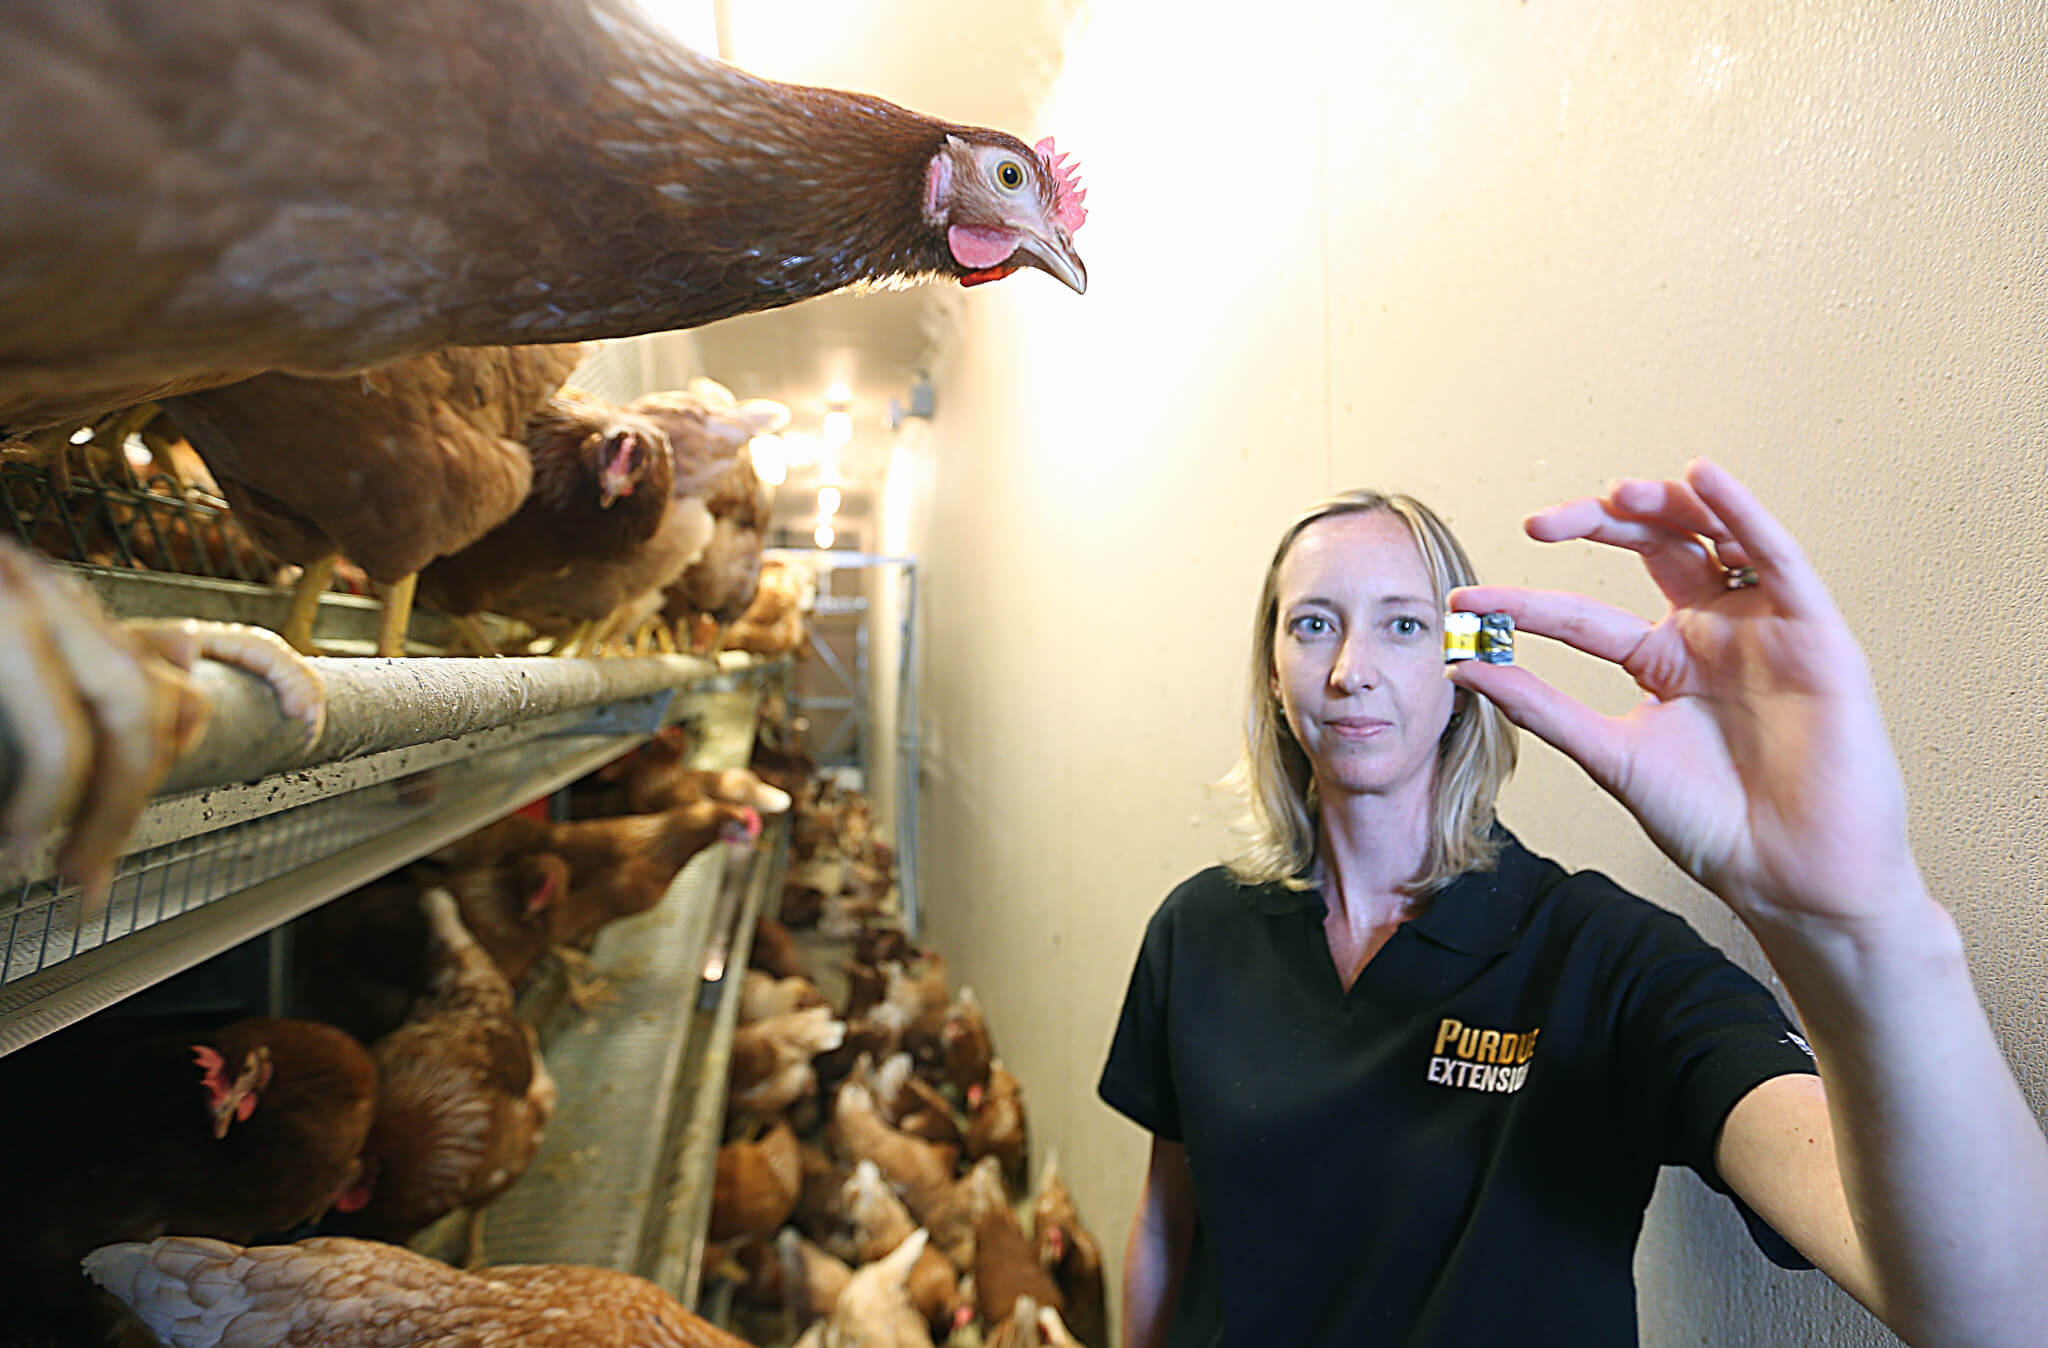 Chickens in a farm. Erasmus holds up an accelerometer used to track the activity of poultry